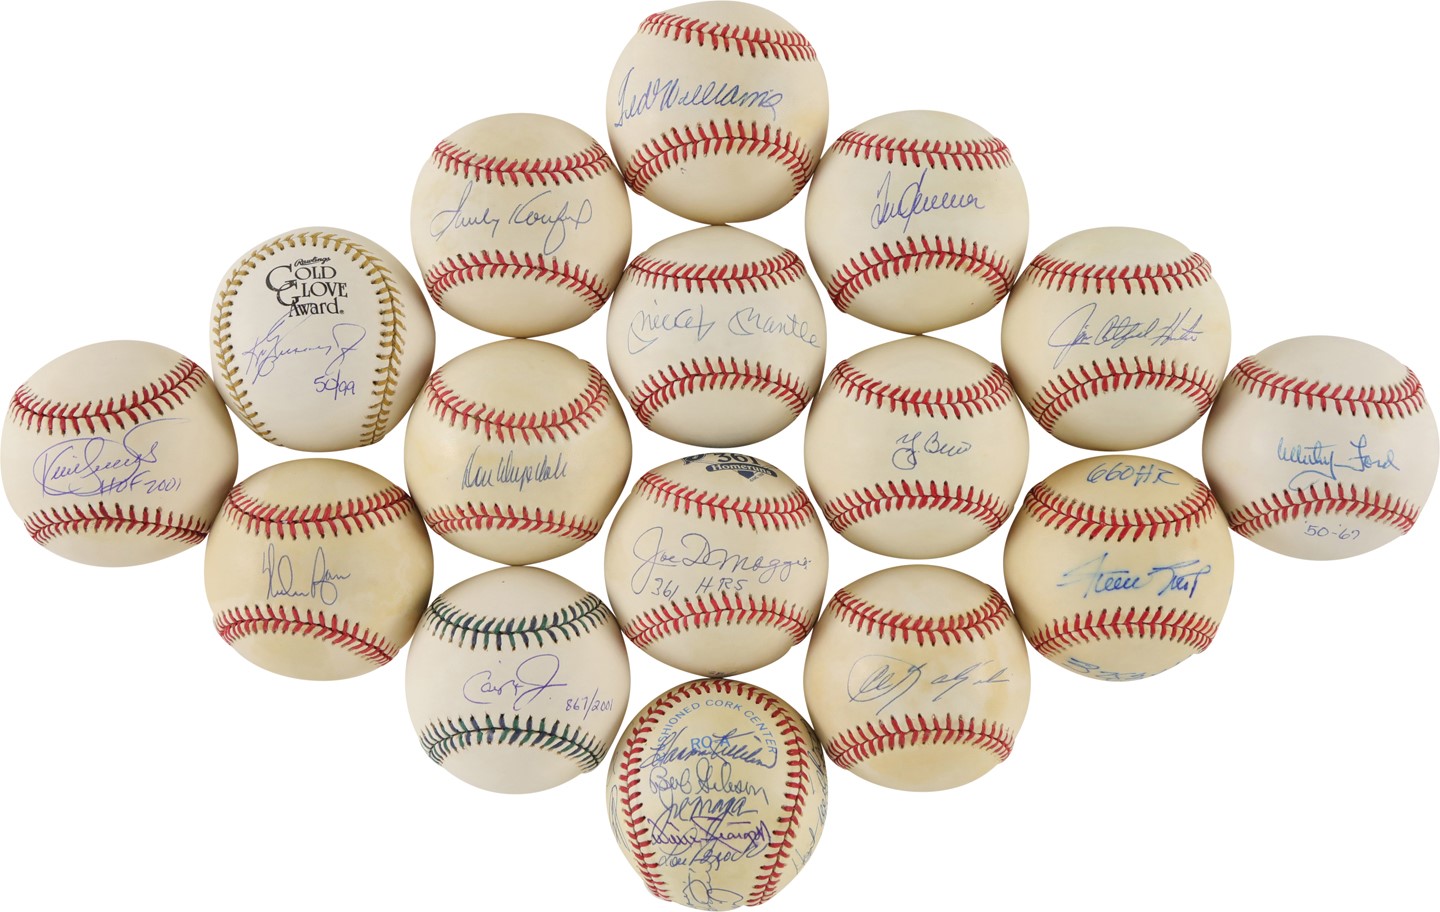 - Hall of Famers Signed Baseball Collection w/Mantle, Williams, & DiMaggio (39)